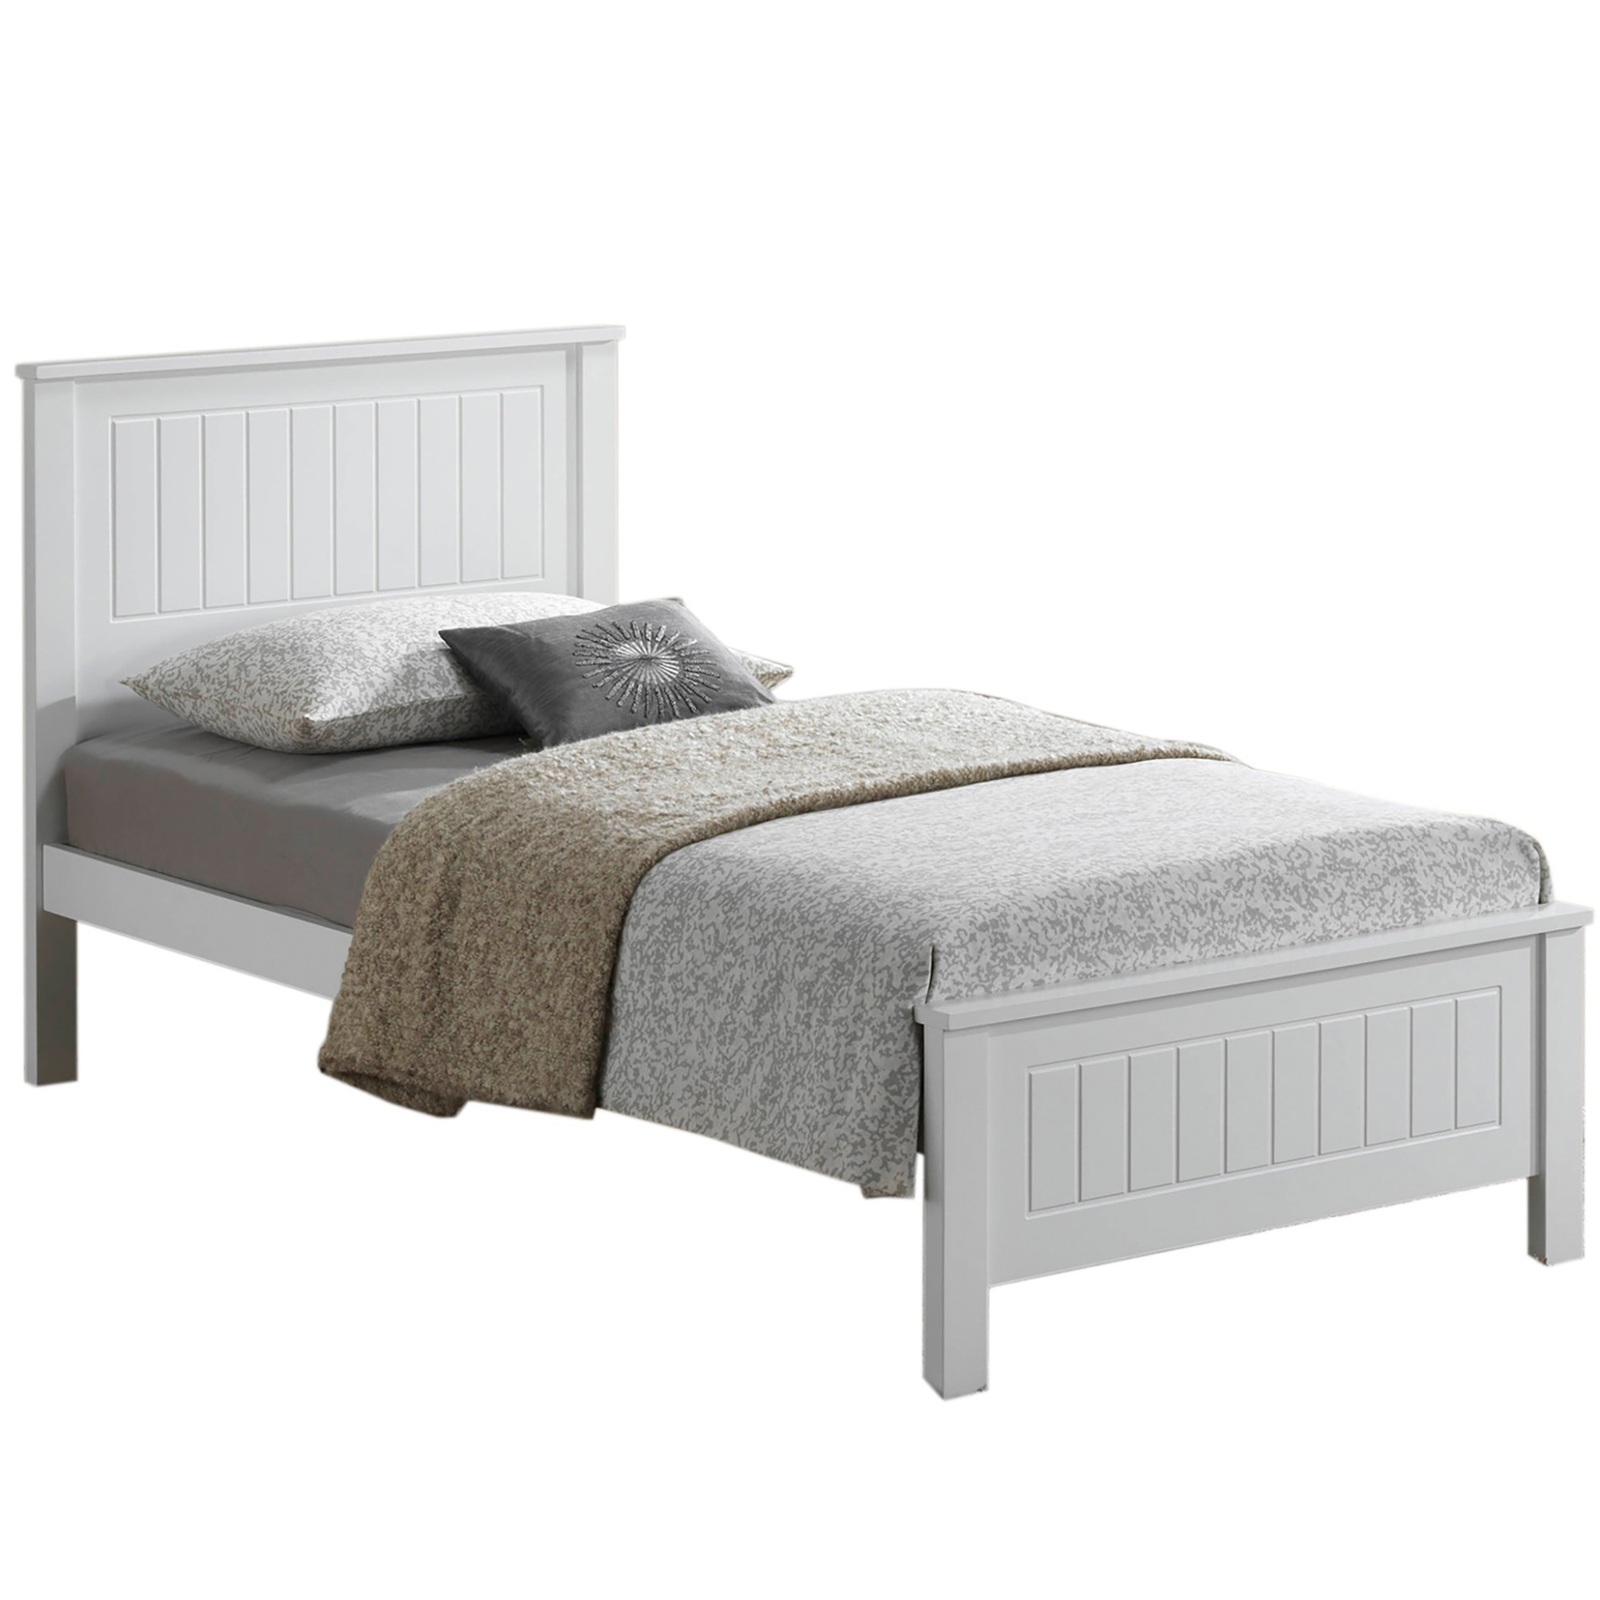 Quincy Wooden Bed Frame - Single Bed